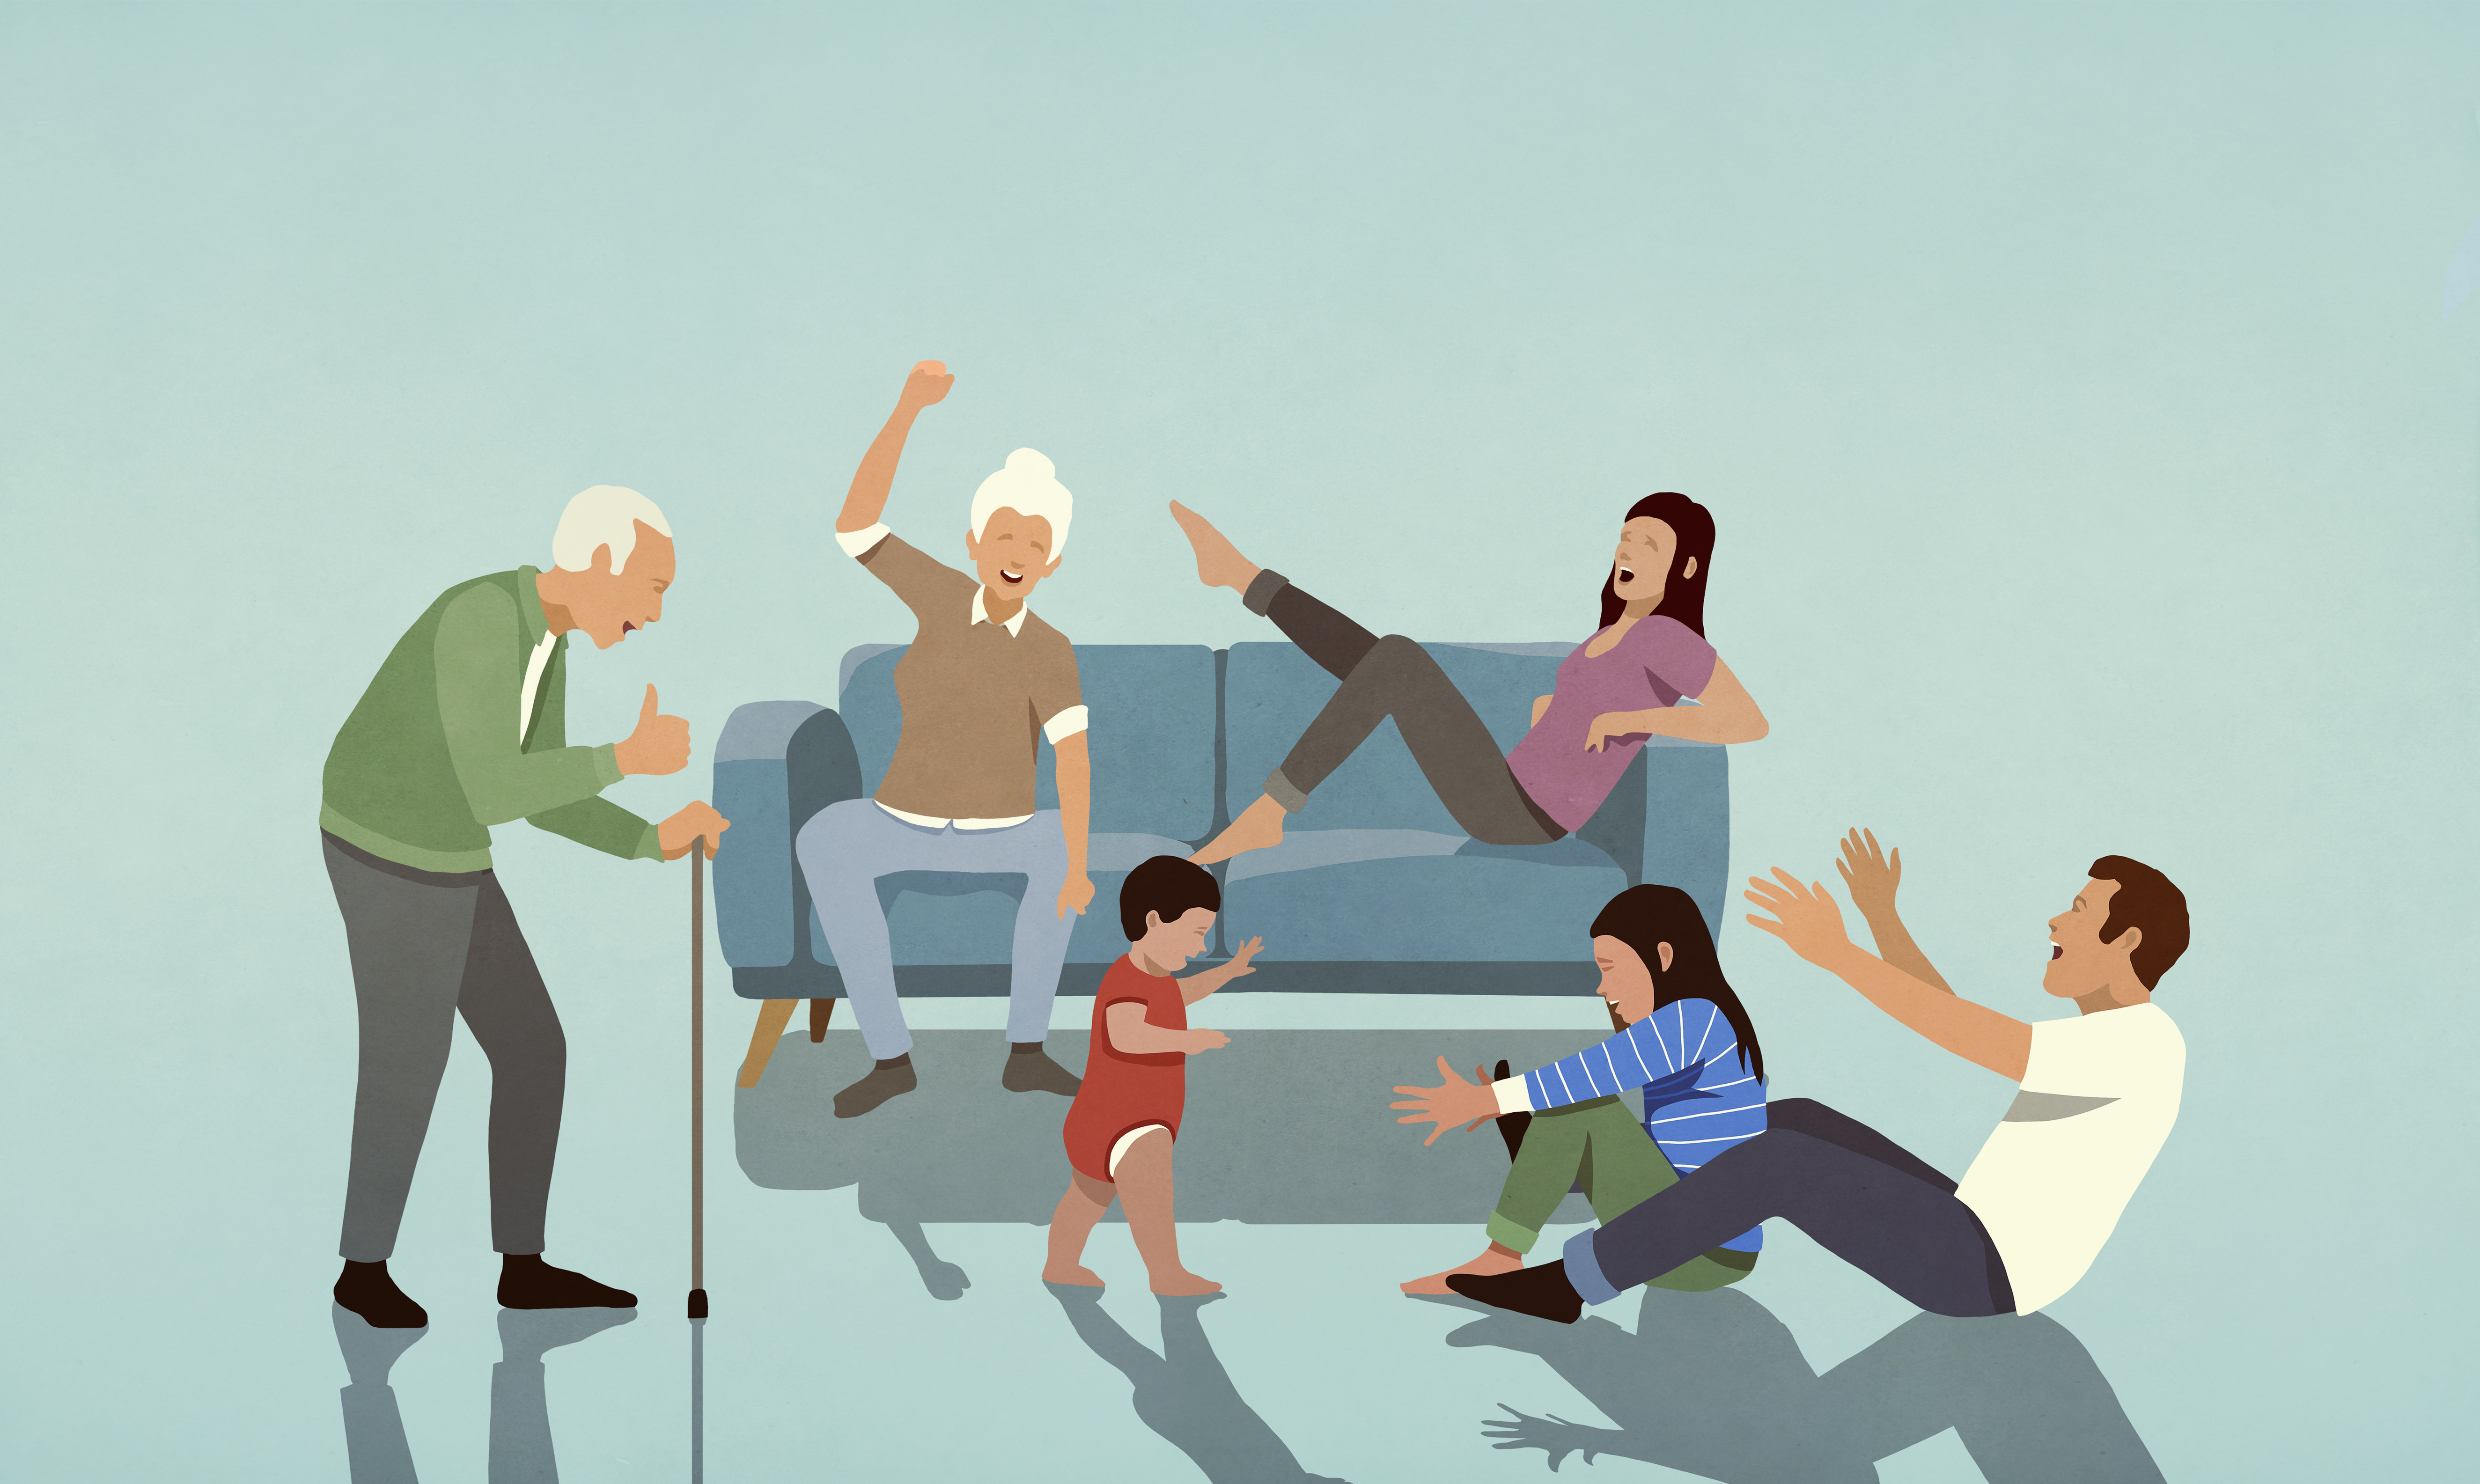 Illustration of grandparents and parents playing with children.